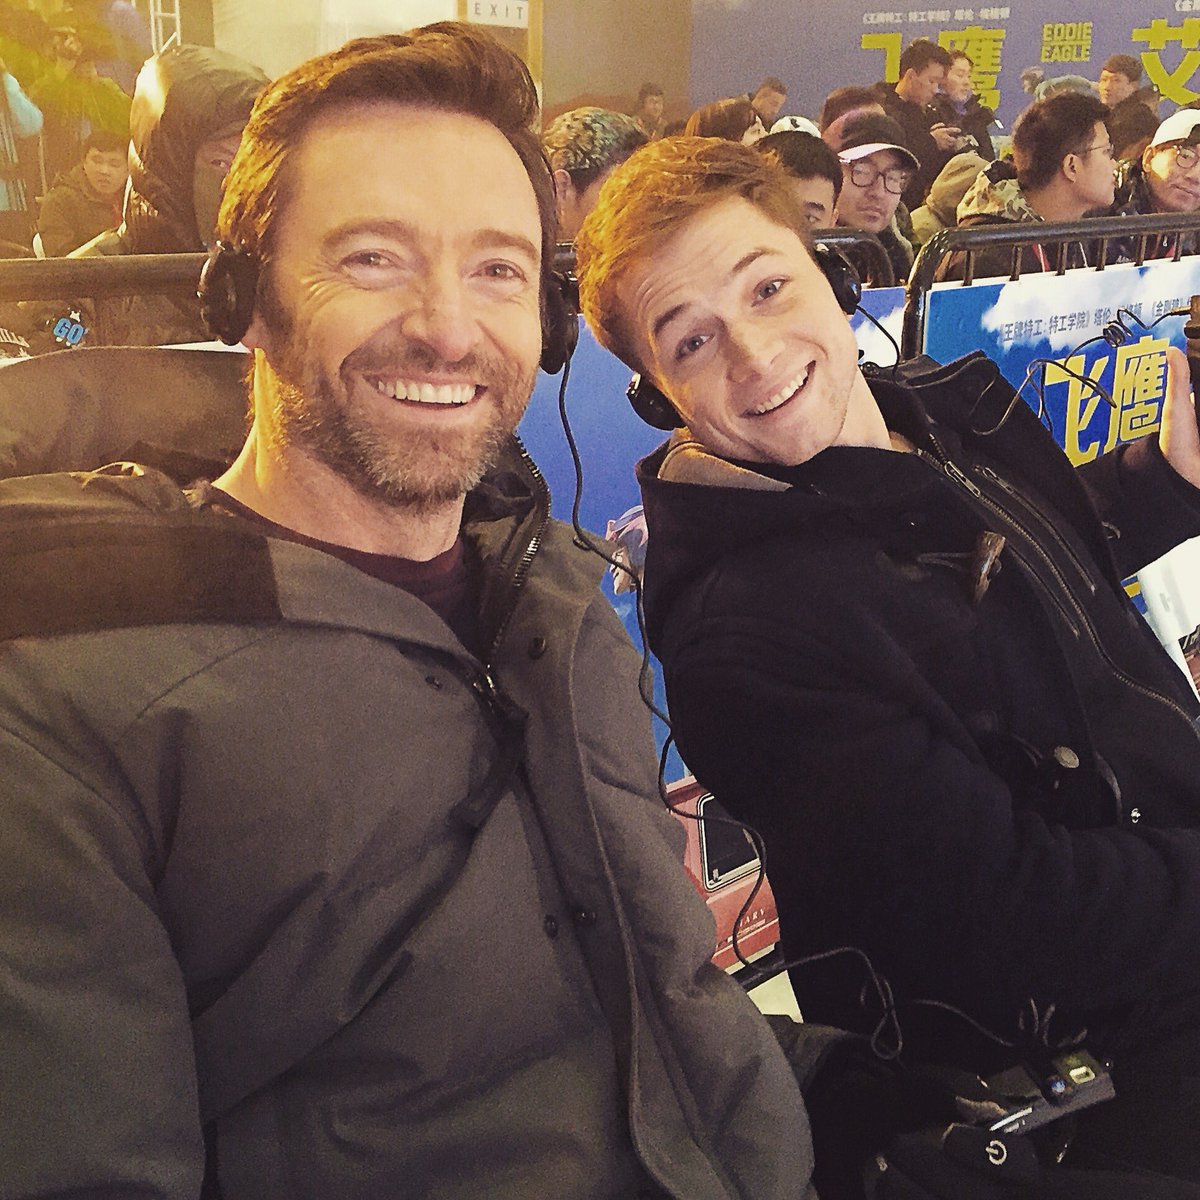 Awesome and freezing  @EddieEagleMovie ski event at Qiao Bo Ice & Snow World with @TaronEgerton https://t.co/VOyKCYVrZ5